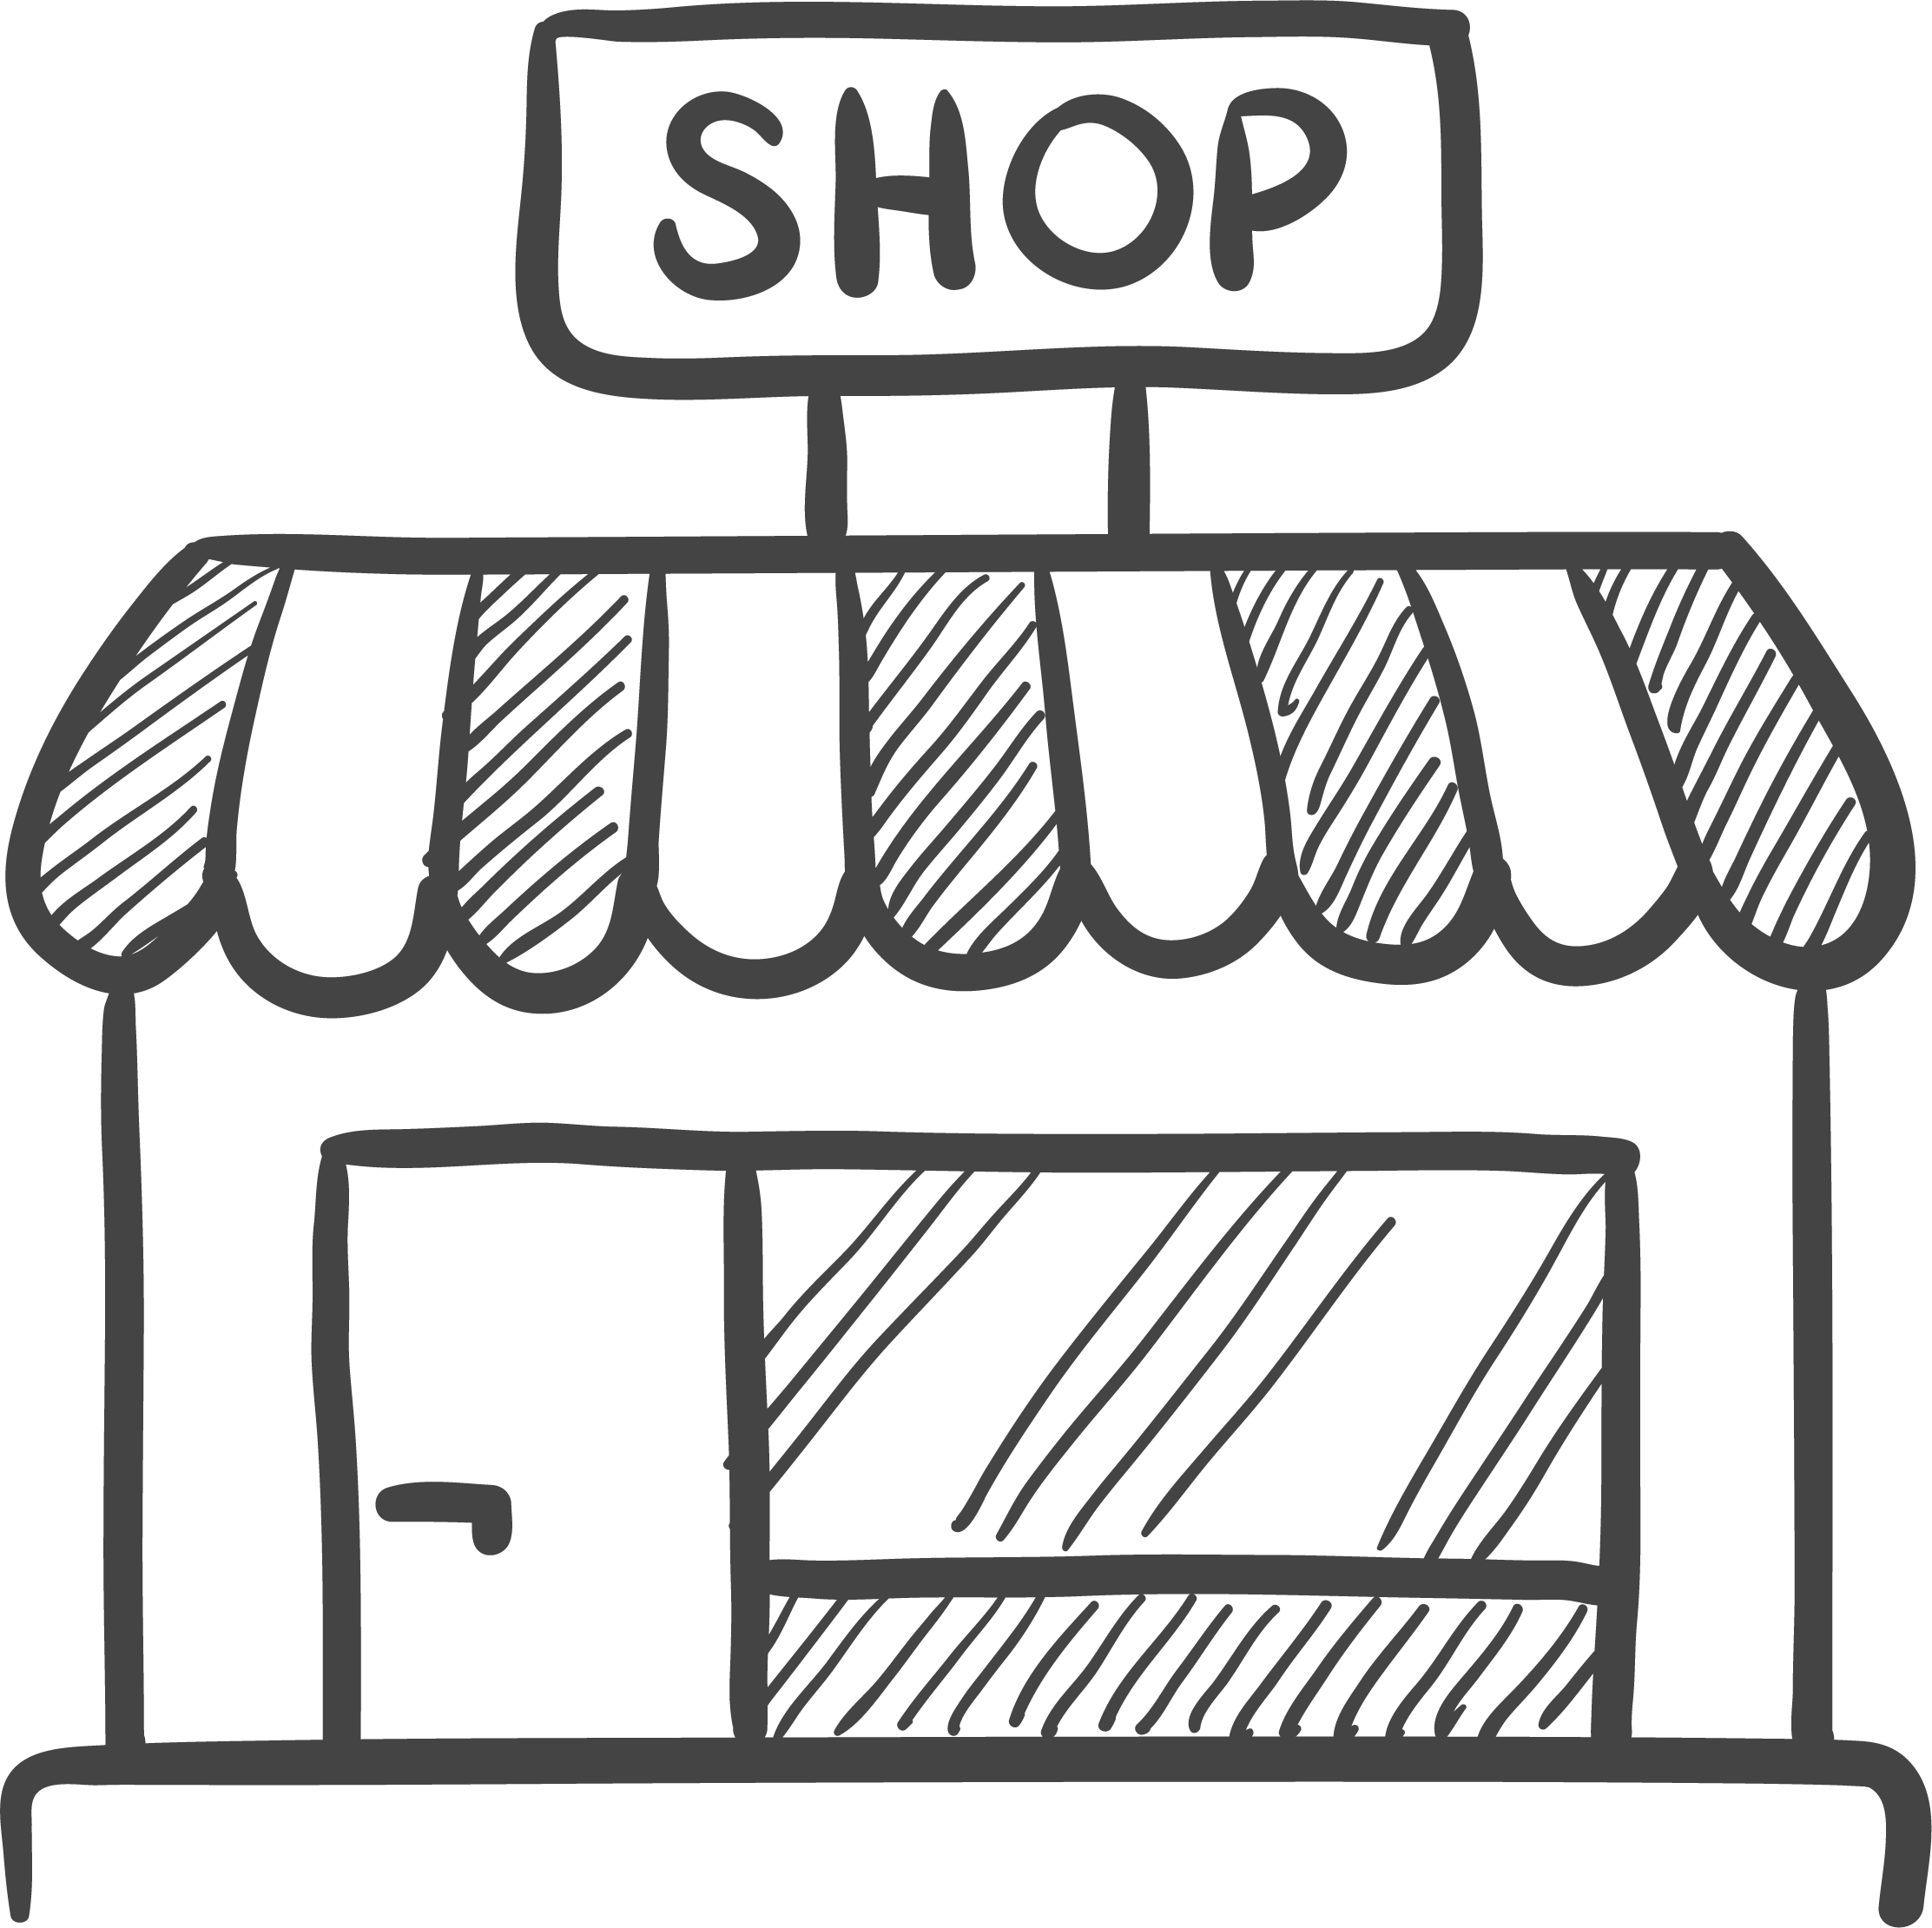 Sketch icon of shop store front